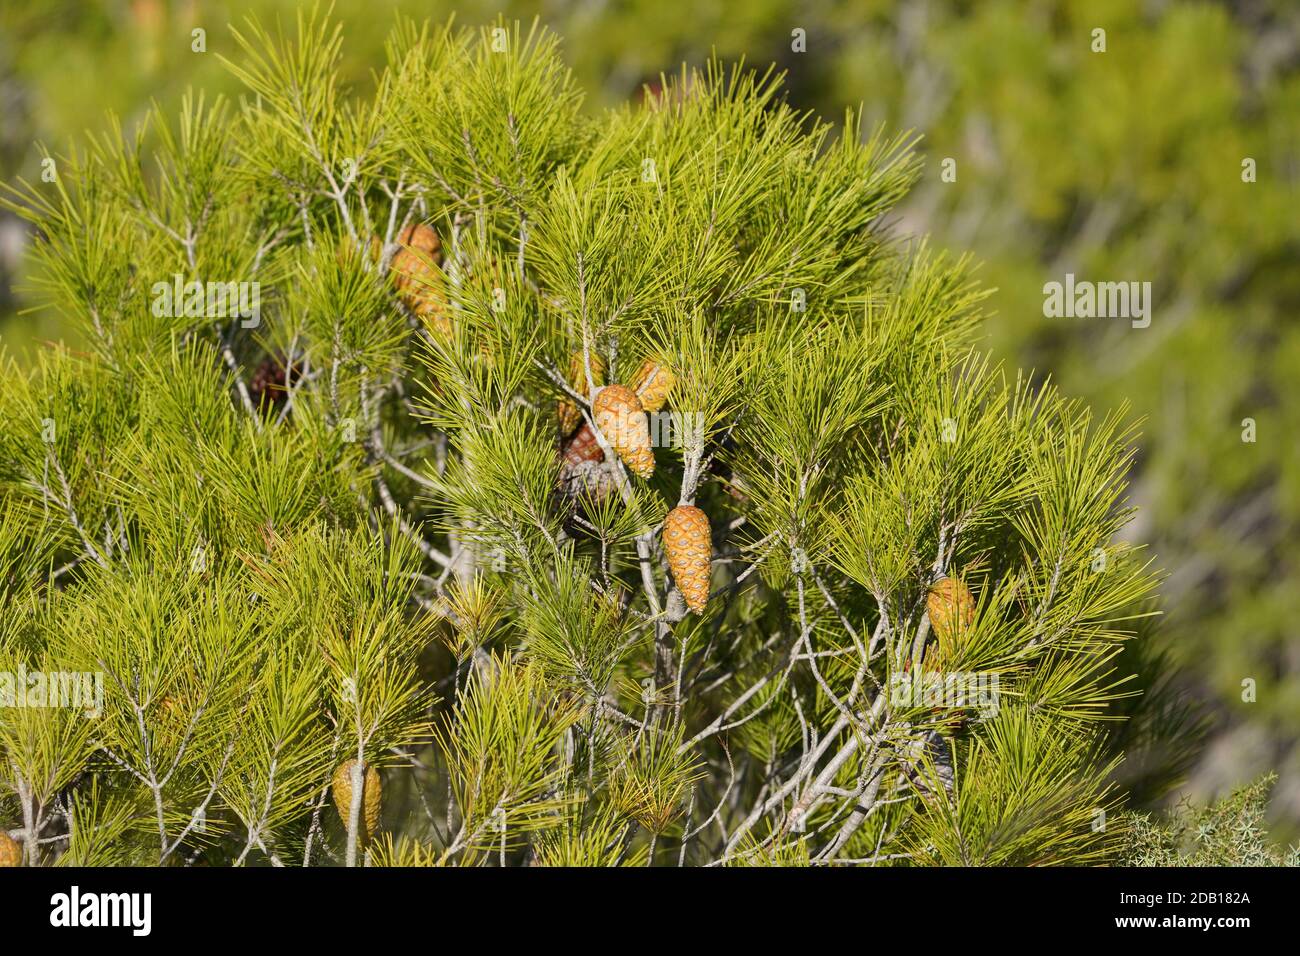 Aleppo pine (Pinus halepensis) branch with cones. Spain. Stock Photo